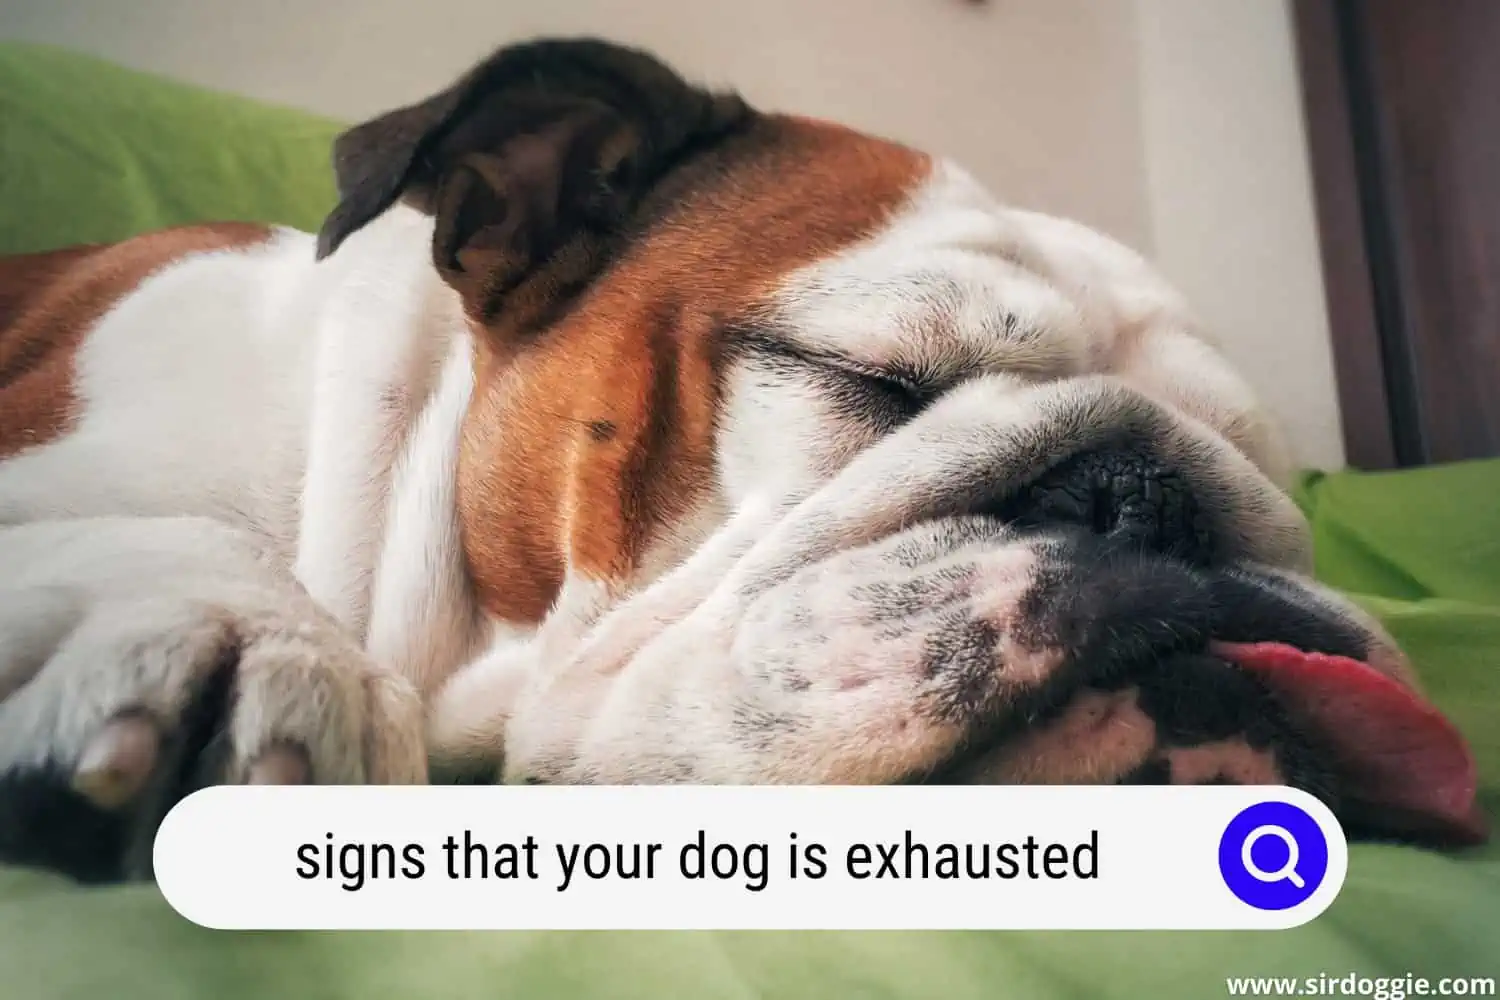 signs dog is exhausted